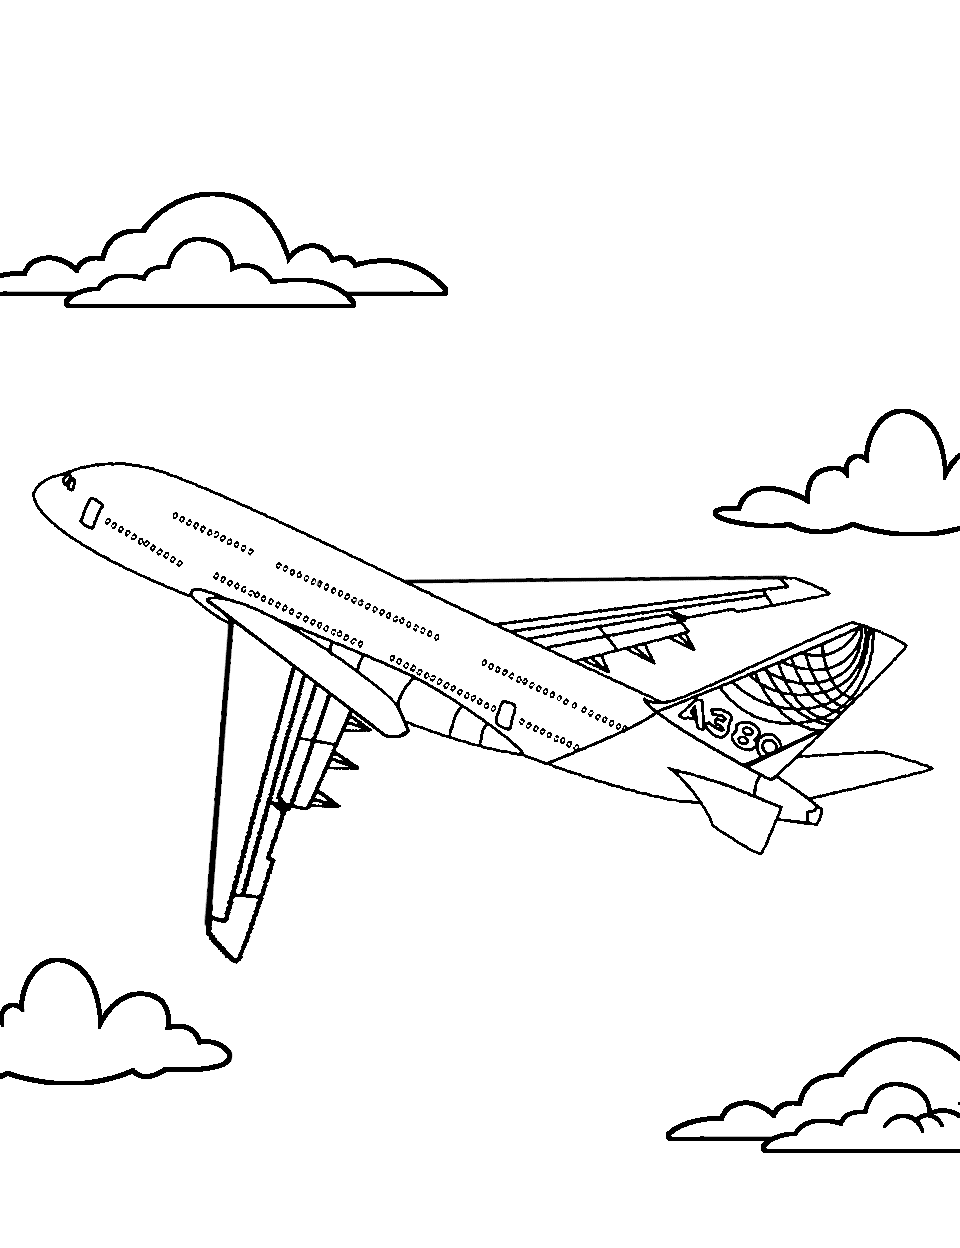 Airbus A380 in the Clouds Airplane Coloring Page - The double-decker Airbus A380 flying high among fluffy clouds.